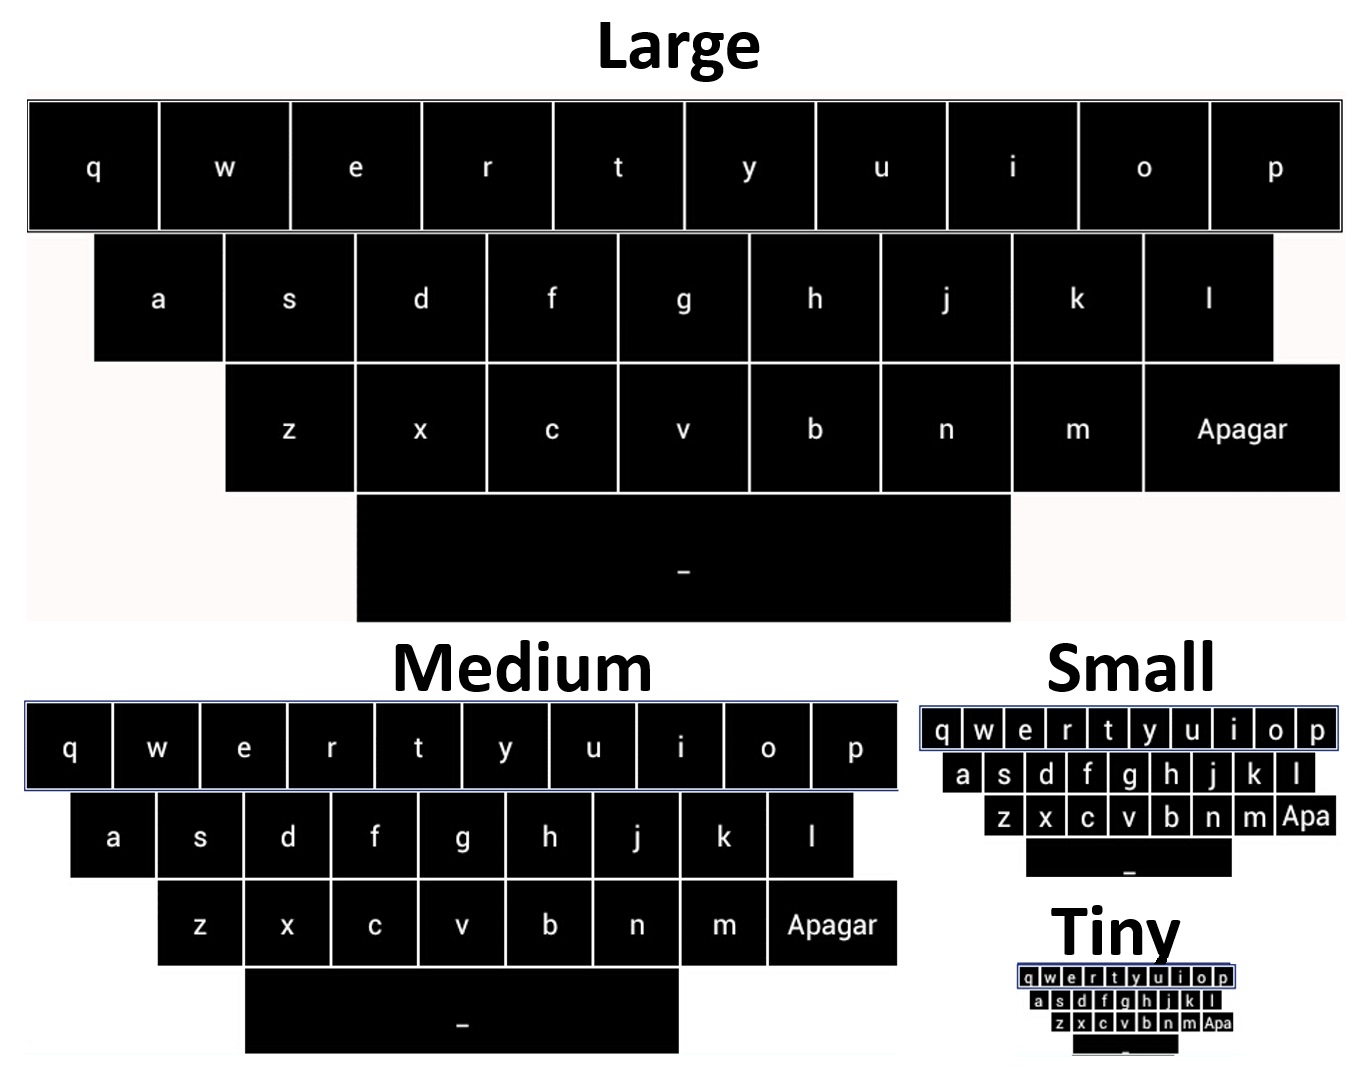 Four keyboard sizes side-by-side. With the Large being about the same size as the other three, with keys of 15mm. With Medium being bigger than the size of the remaining two, with keys of 10 mm. Small with keys of 5mm. Tiny with keys of size 2.5mm.